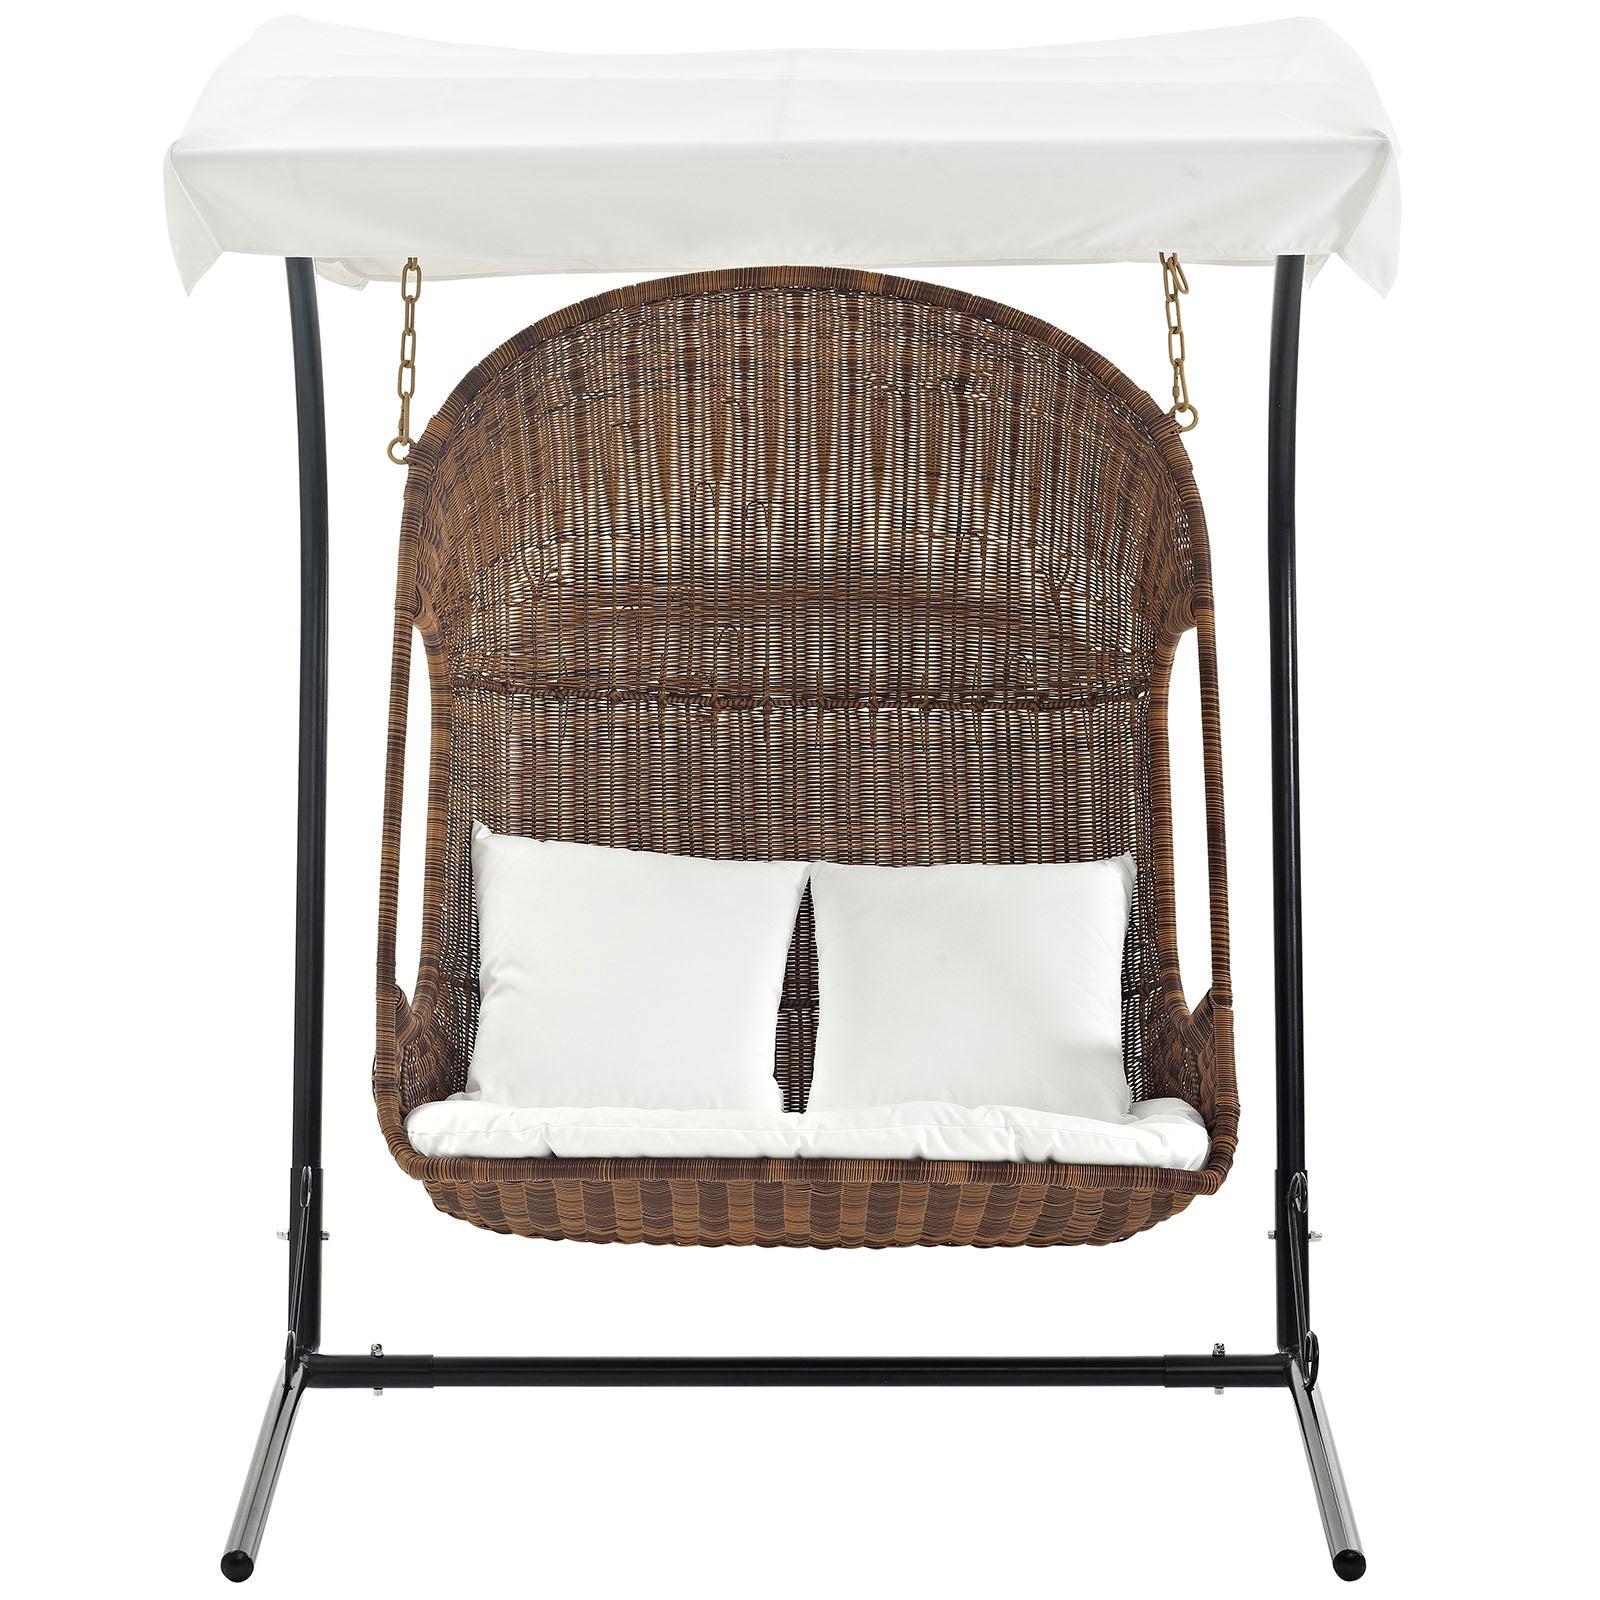 Vantage Outdoor Patio Swing Chair With Stand - East Shore Modern Home Furnishings